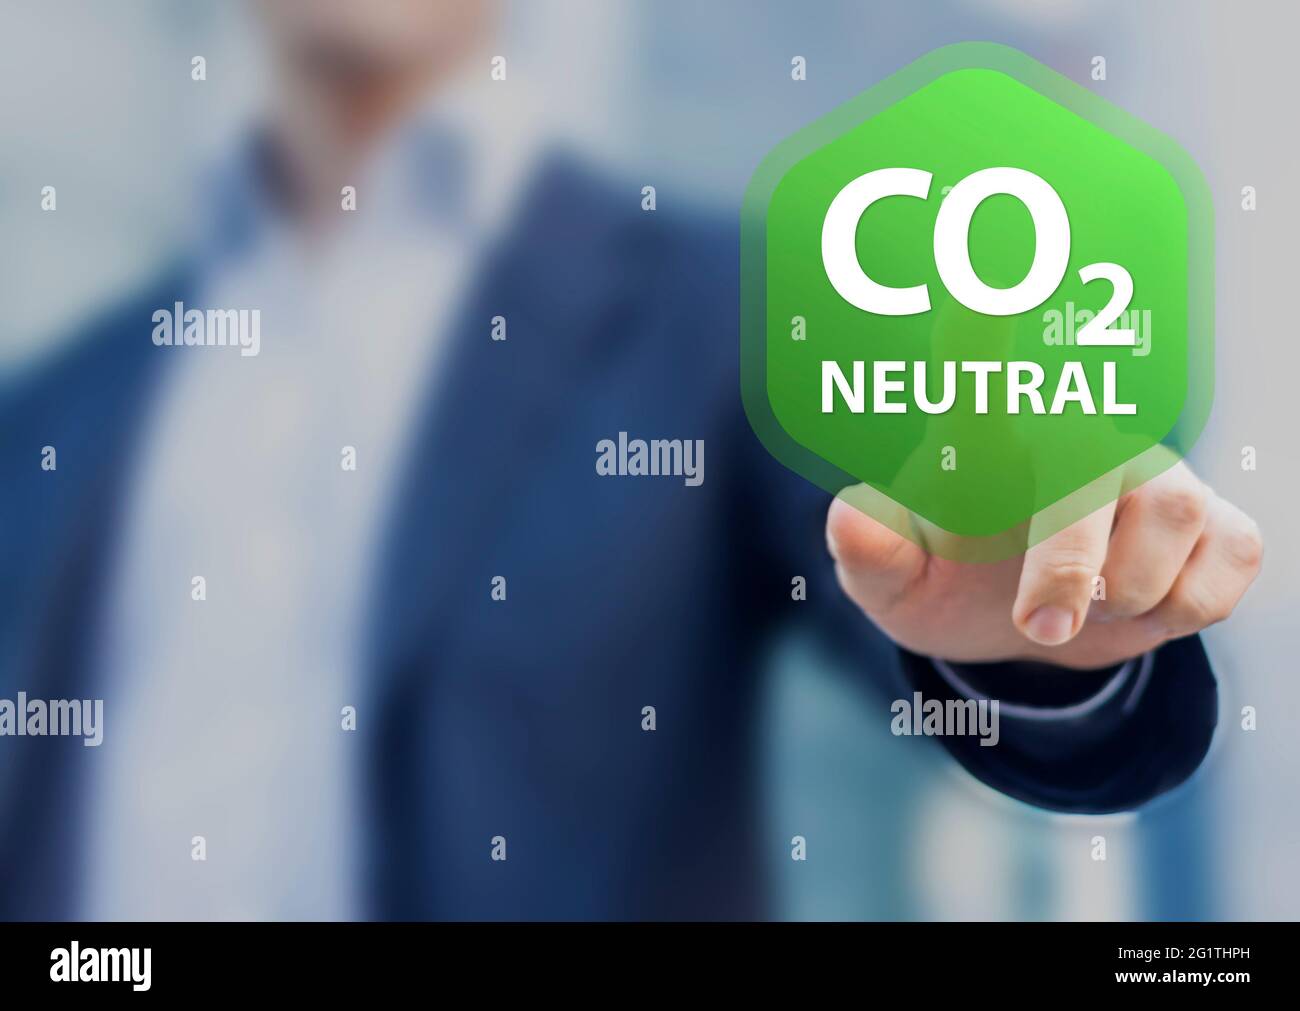 CO2 neutral commitment in business, finance and industry to reduce carbon dioxide emissions and limit global warming and climate change. Concept with Stock Photo